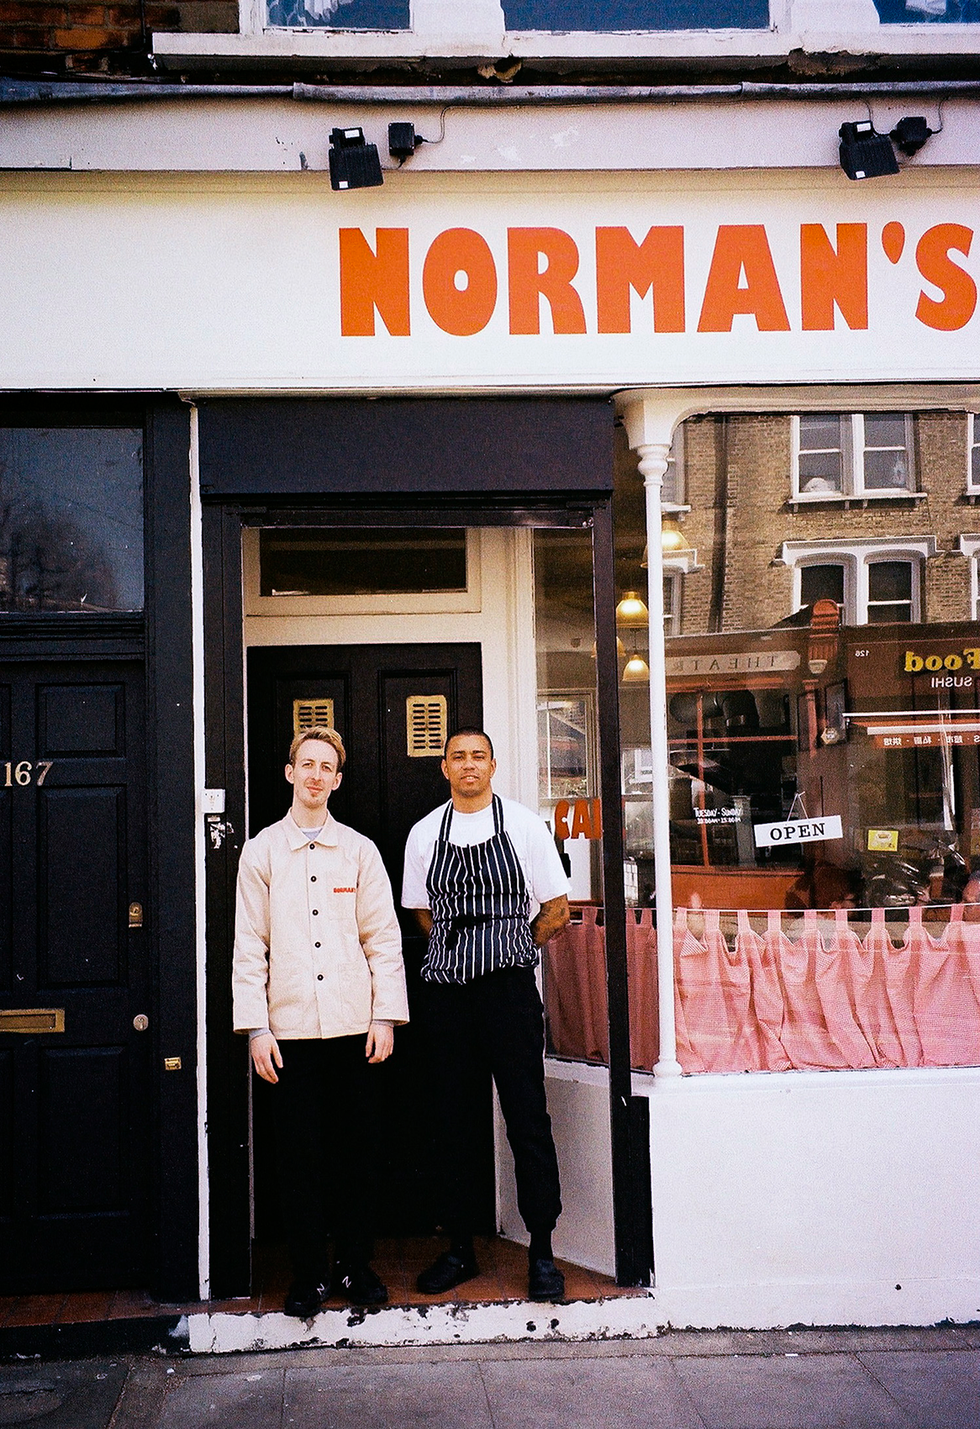 norman's cafe